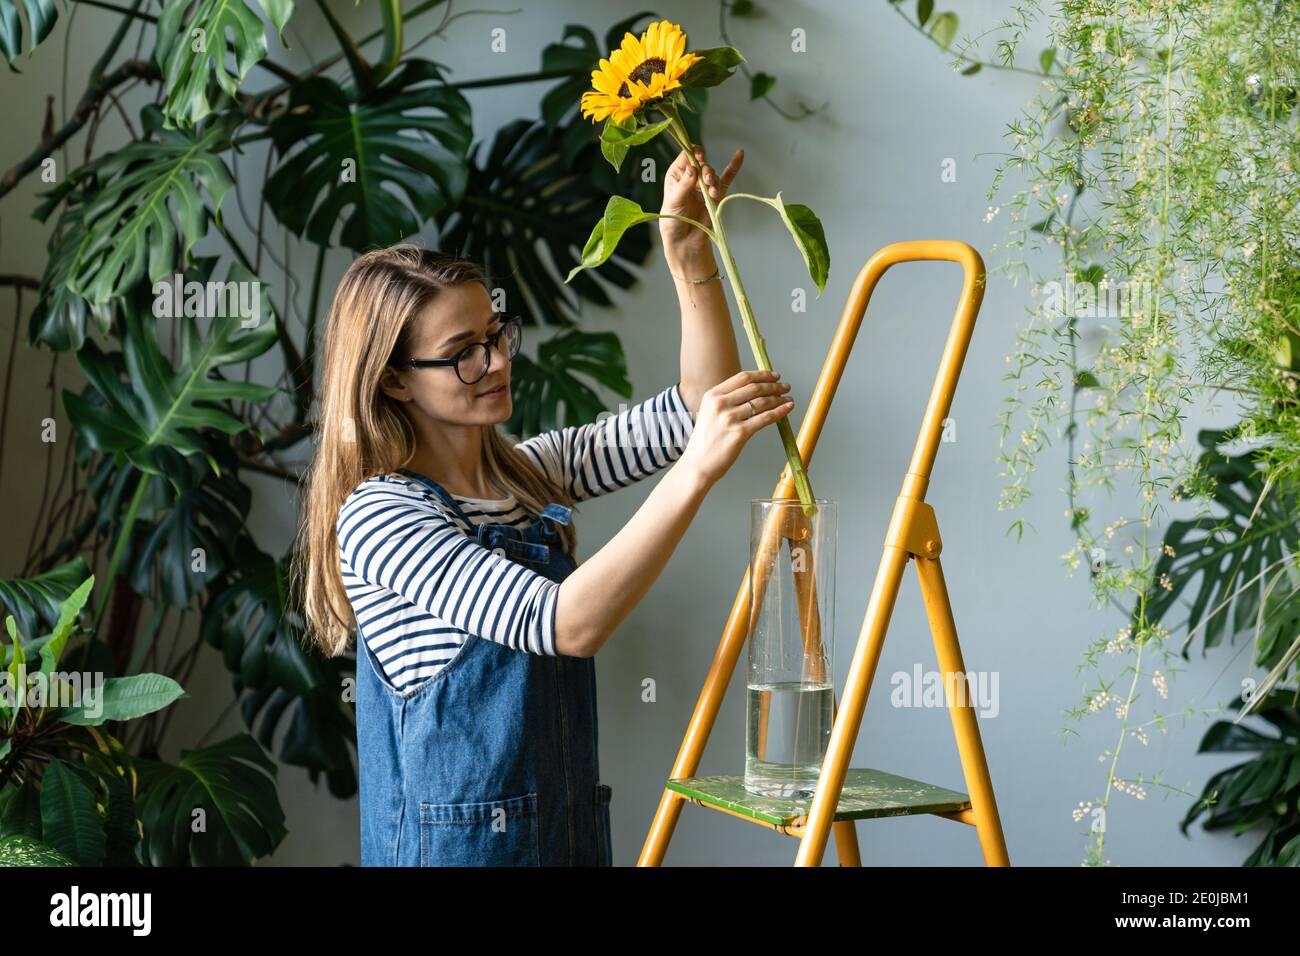 Small business. Florist woman surrounded by tropical plants pulls out a single flower of sunflower from a vase to cut the stem with scissors, standing Stock Photo